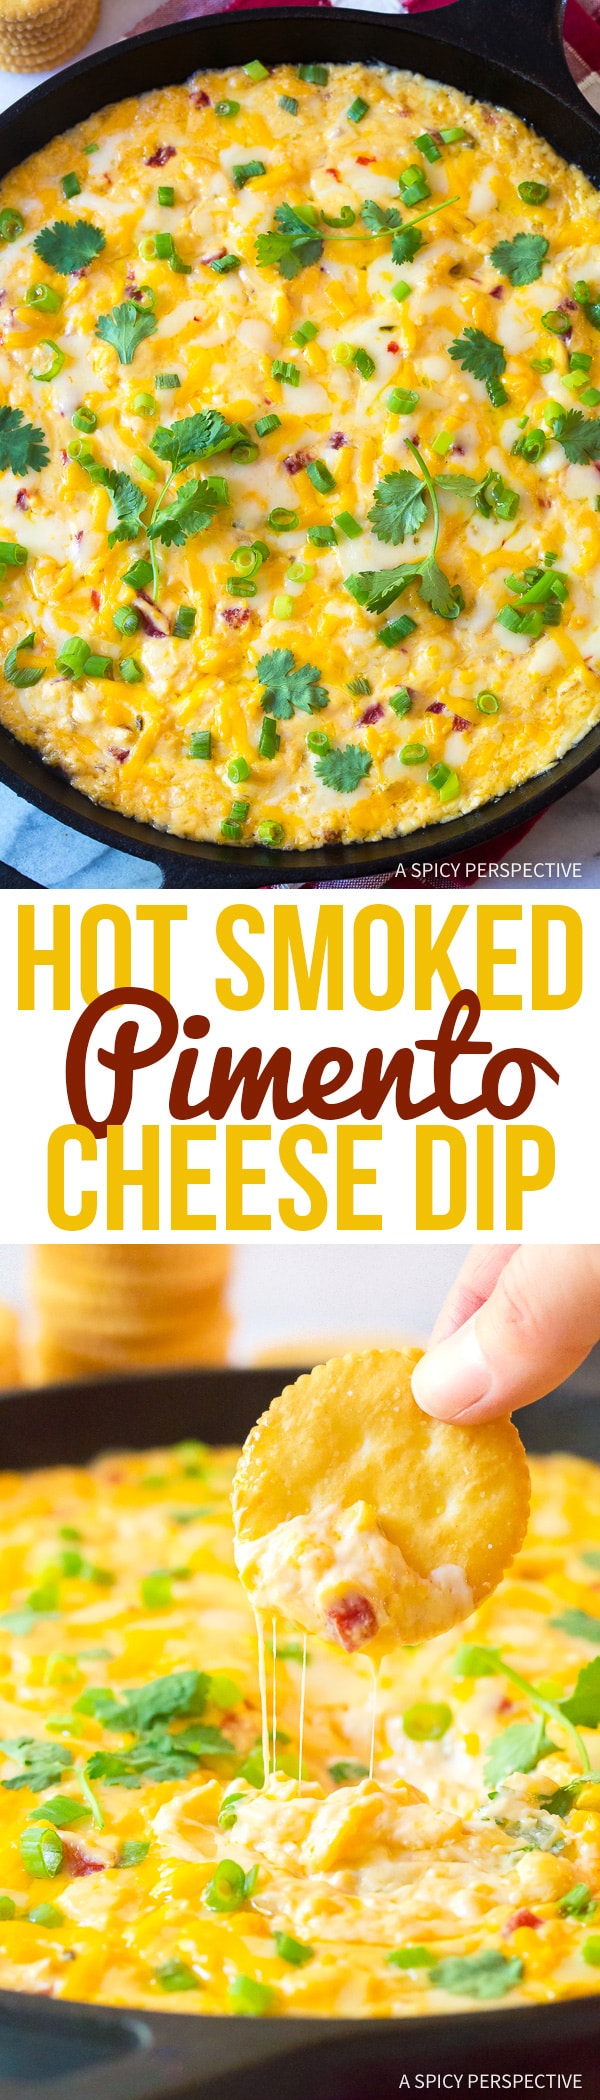 The Best Hot Smoked Pimento Cheese Dip Recipe